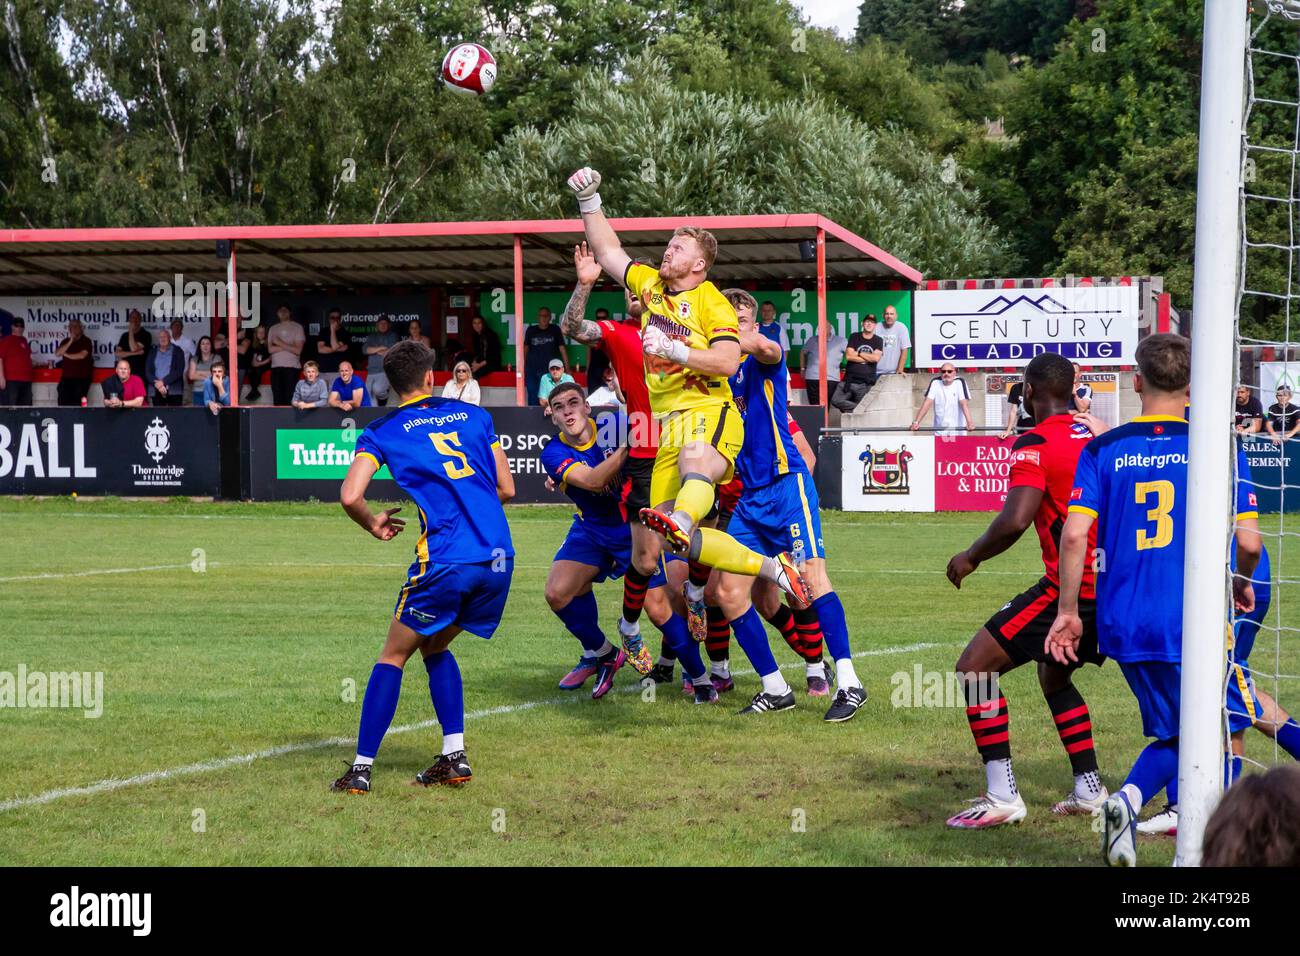 Sheffield FC worlds oldest football club play Glossop North End in the preliminary round of the 2022-23 FA Cup. Stock Photo